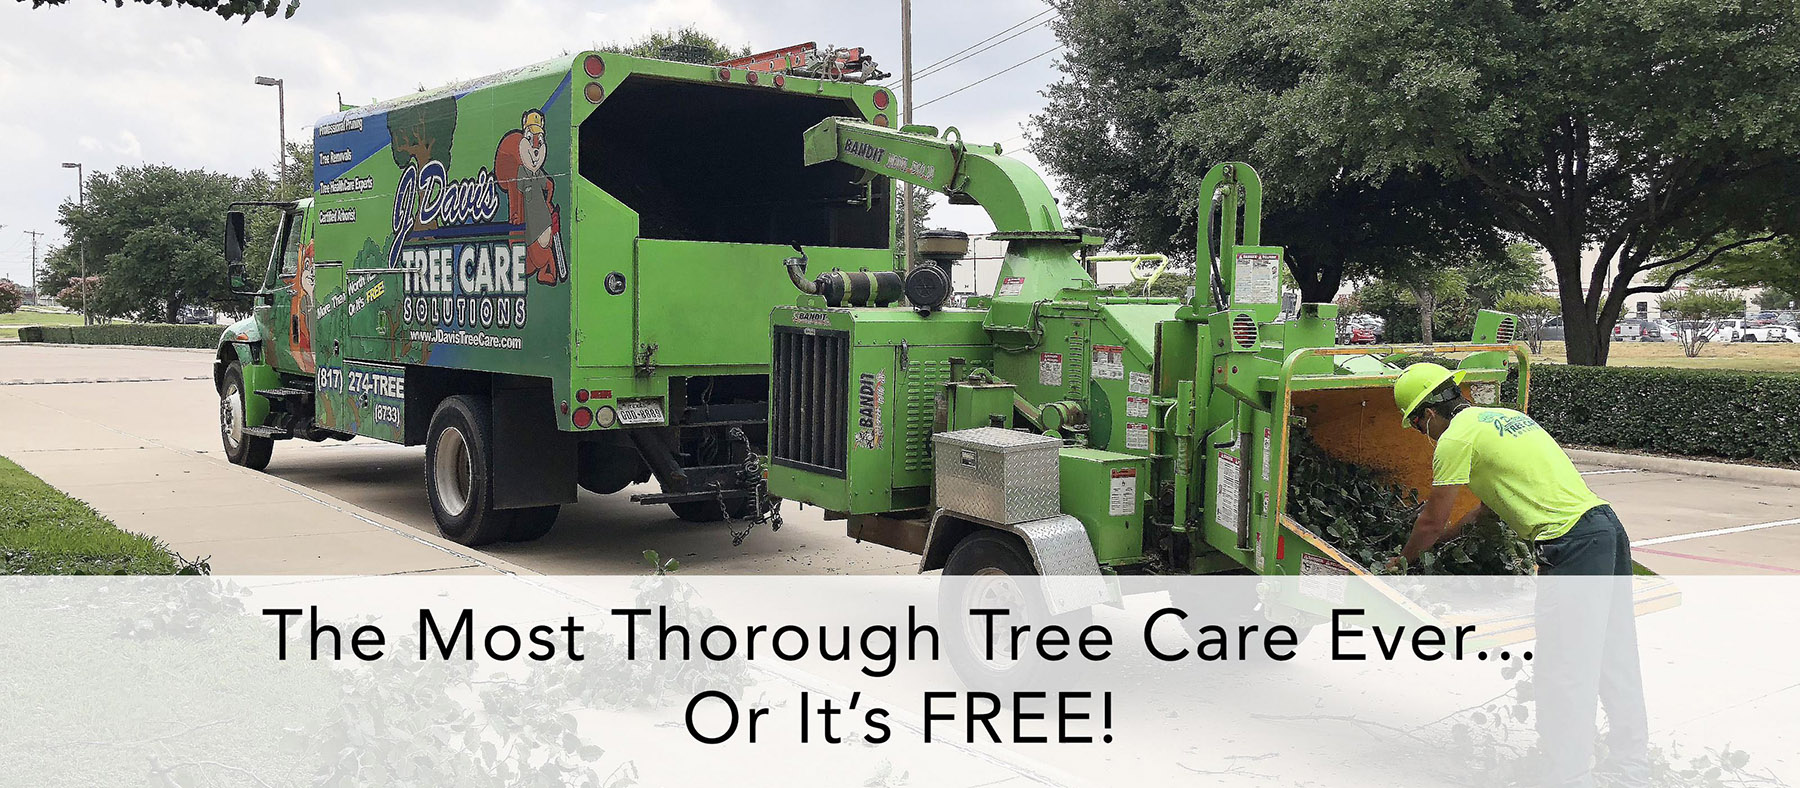 Get Help With Arlington Tree Care Services